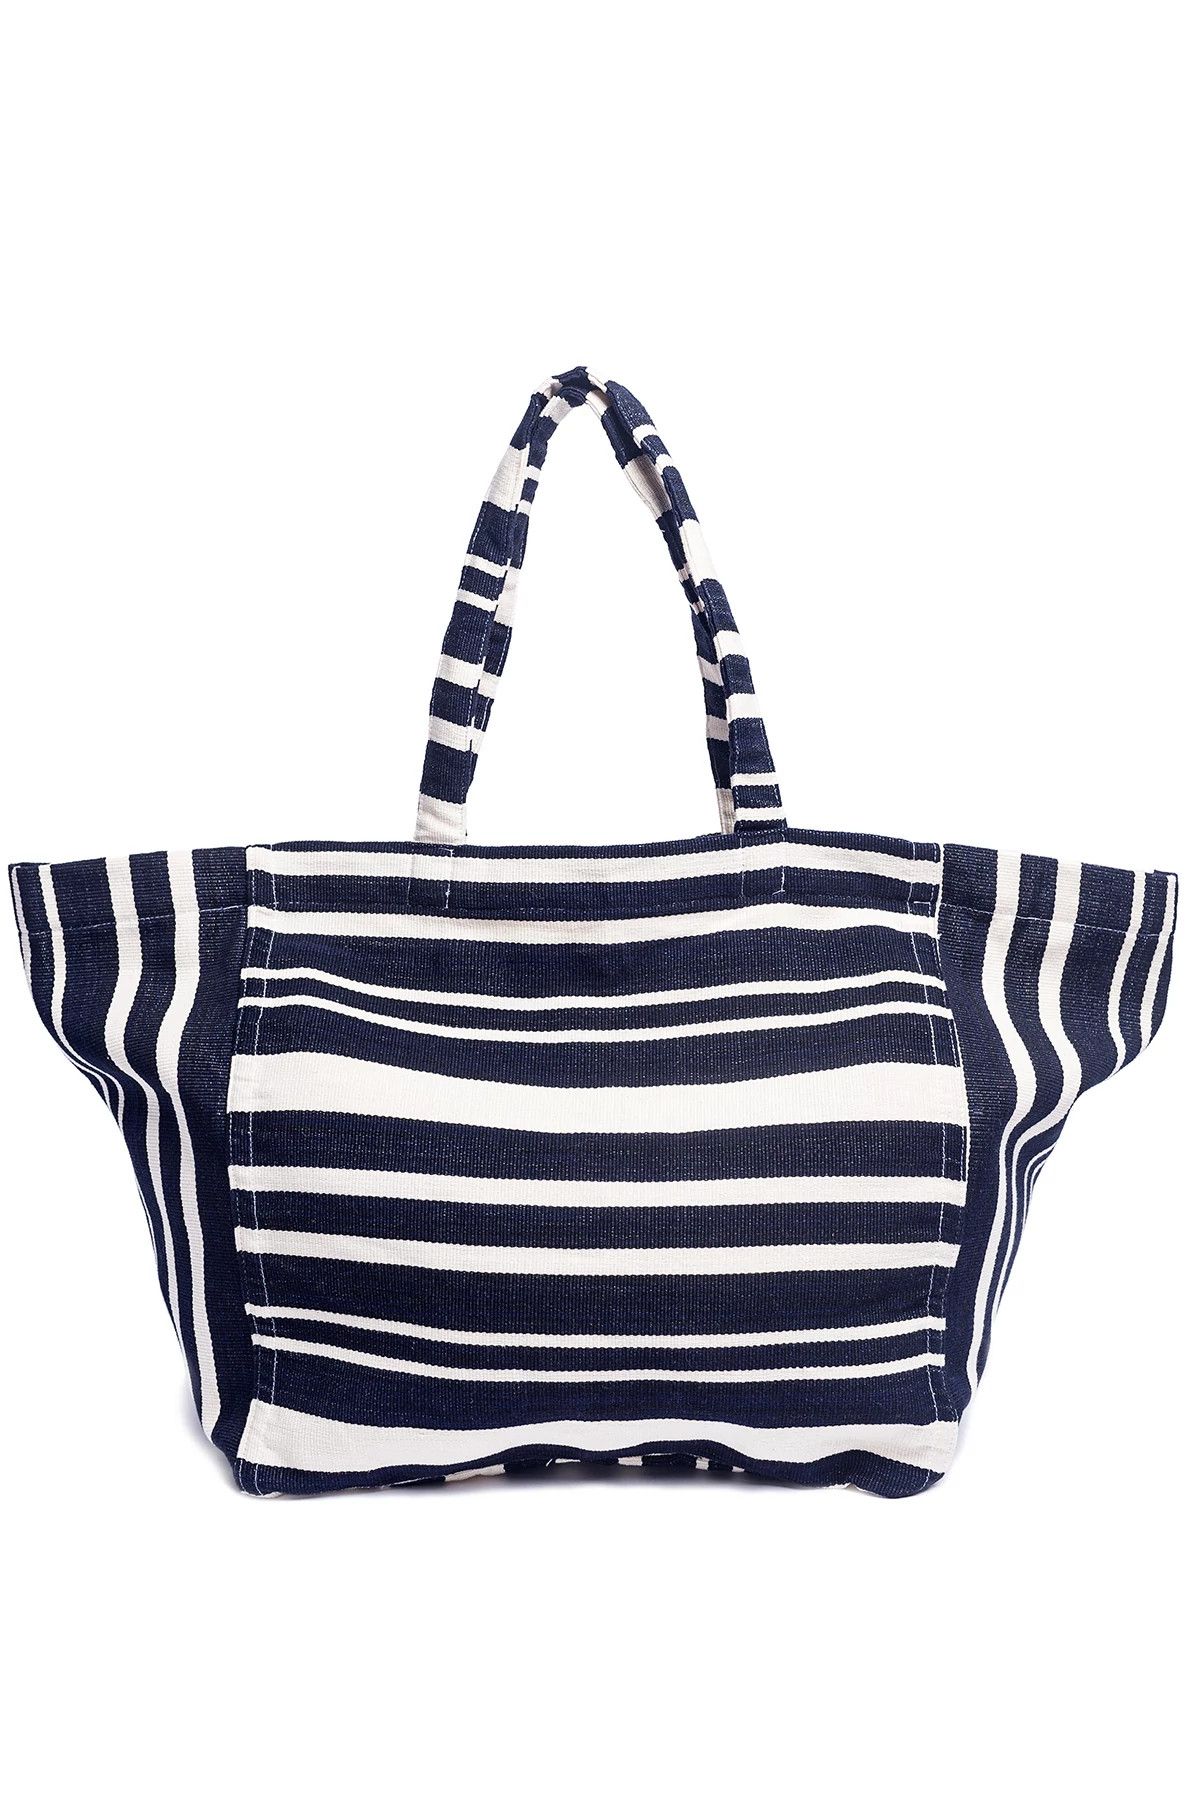 Blanca Oversized Tote | Everything But Water